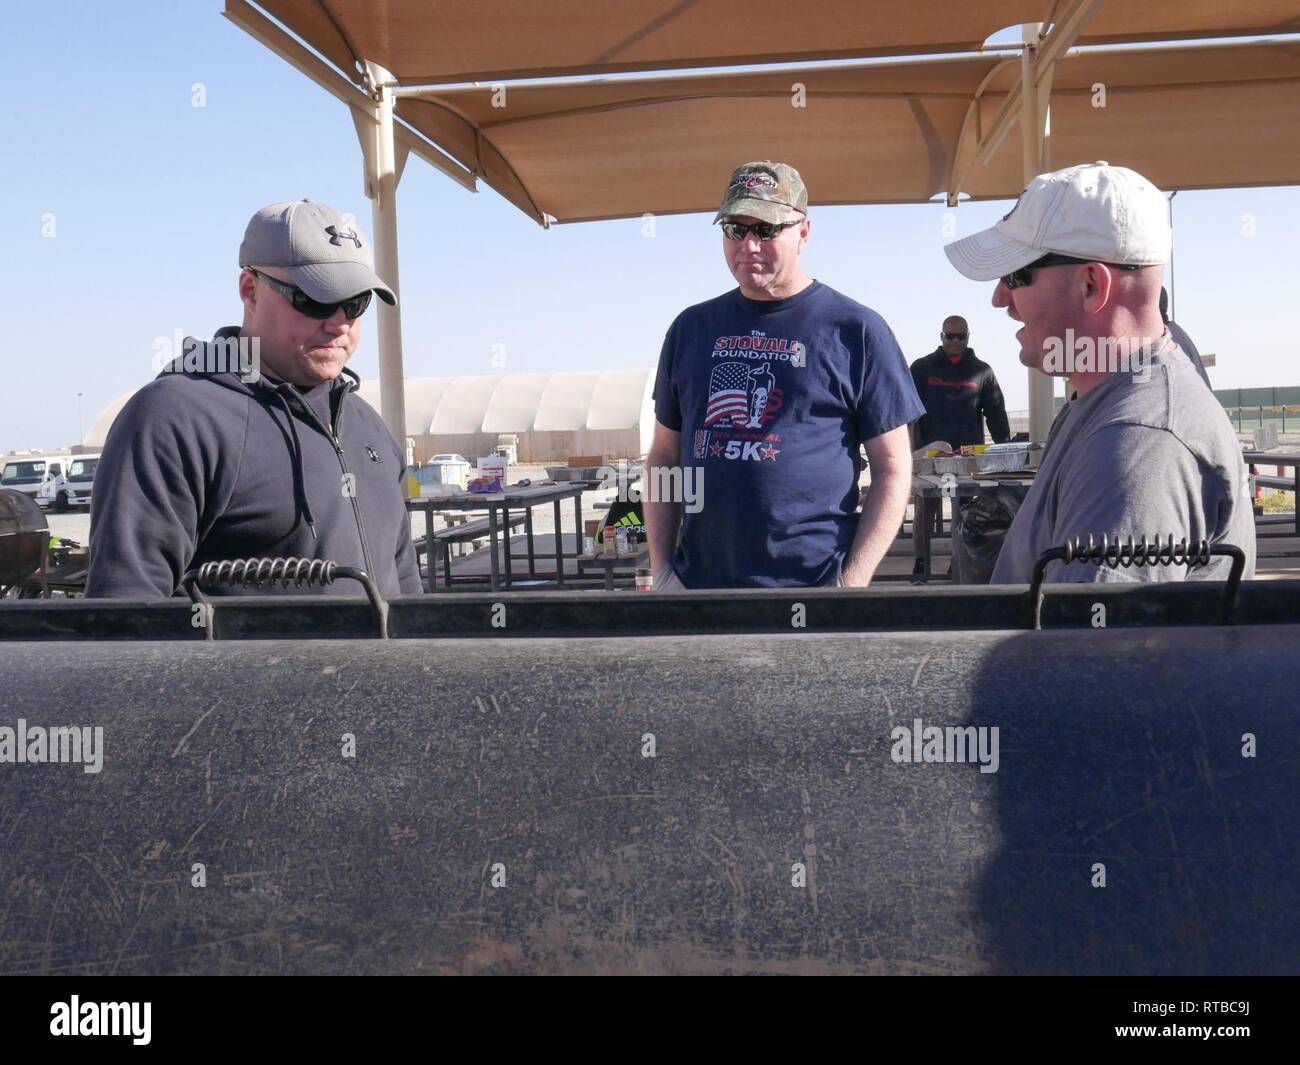 Soldiers of the 184th Sustainment Command cooked out and enjoyed Sunday afternoon together before Super Bowl LIII at Camp Arifjan, Kuwait, Feb. 3, 2019. Stock Photo